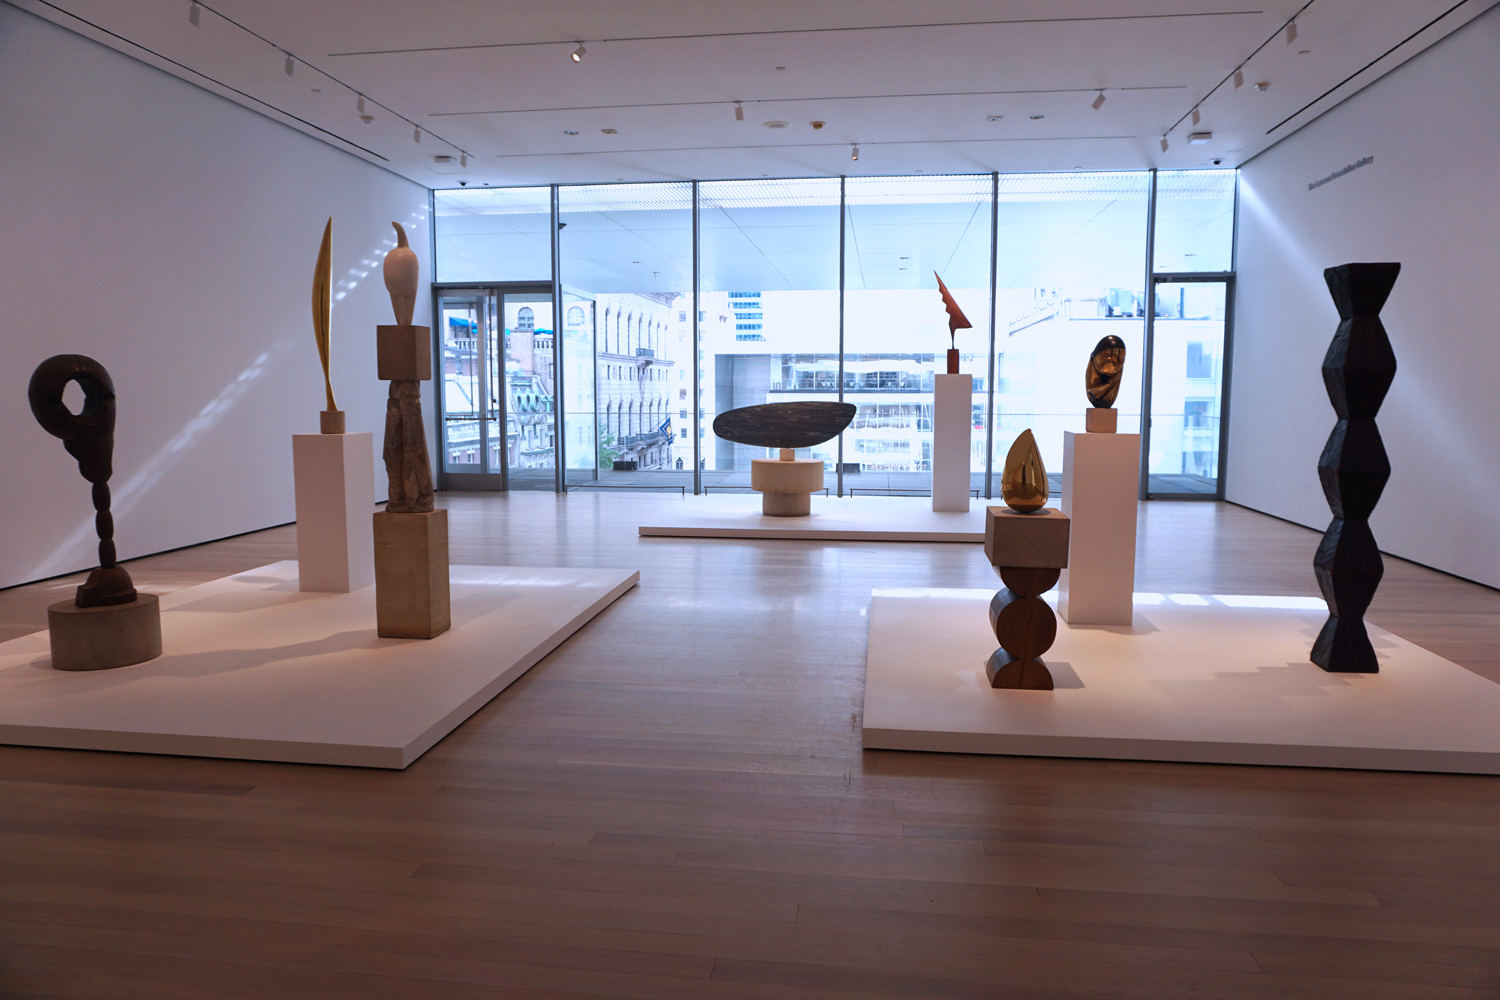 MoMA’s permanent collection rehang opens with an airy gallery dedicated to the sculptures of Constantin Brâncuși.